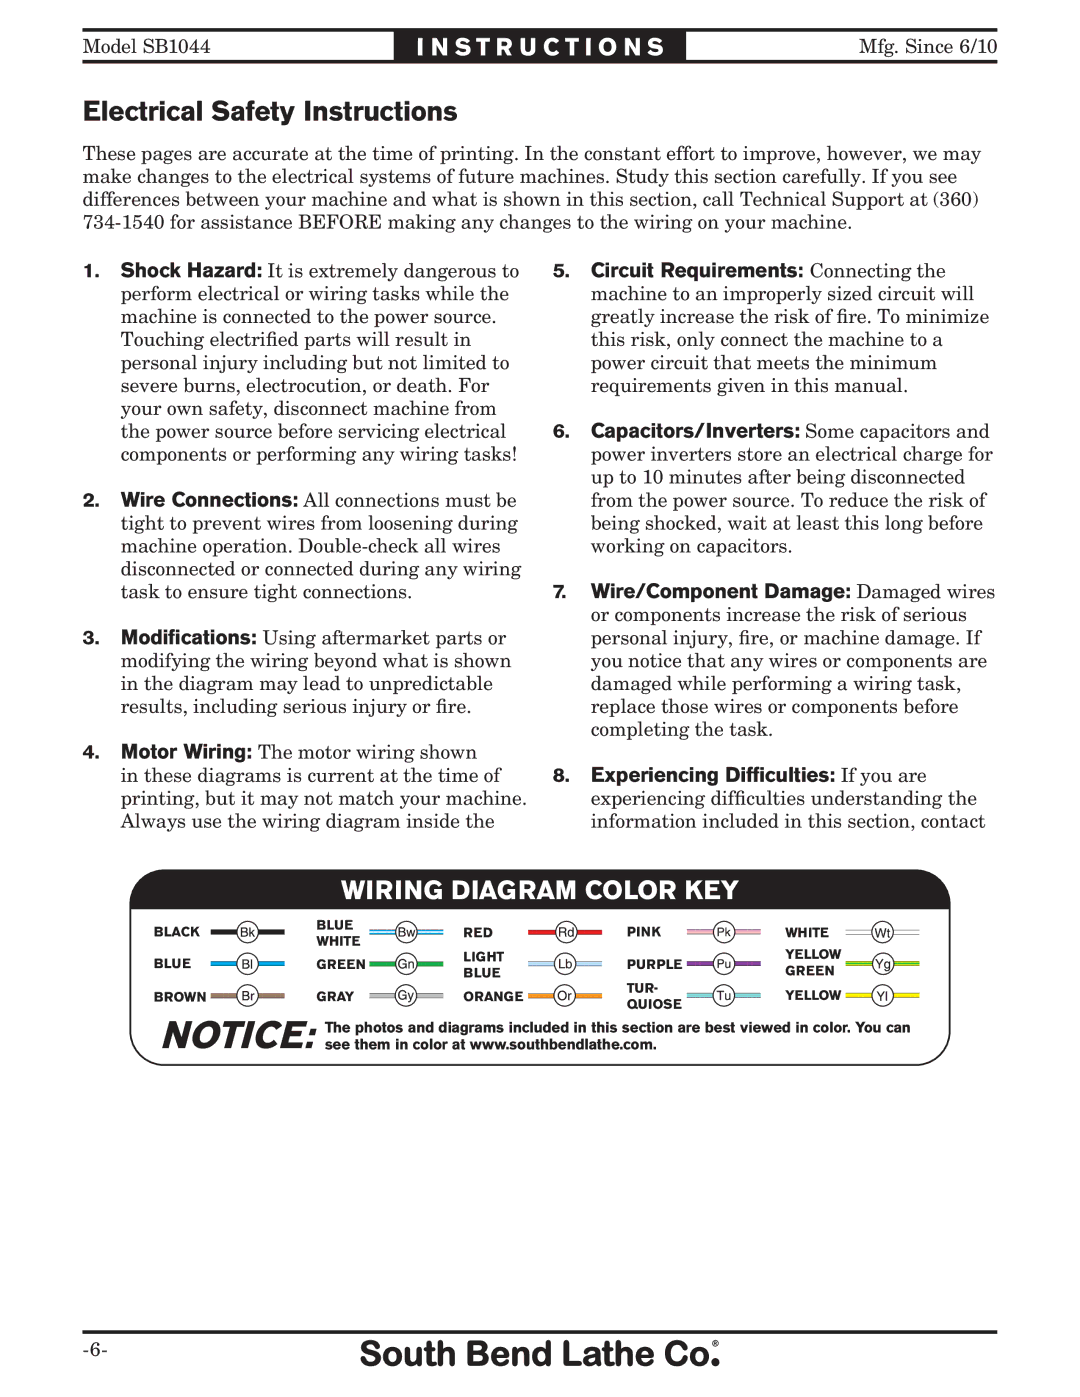 Southbend SB1044 instruction sheet Electrical Safety Instructions, Wiring Diagram Color KEY 